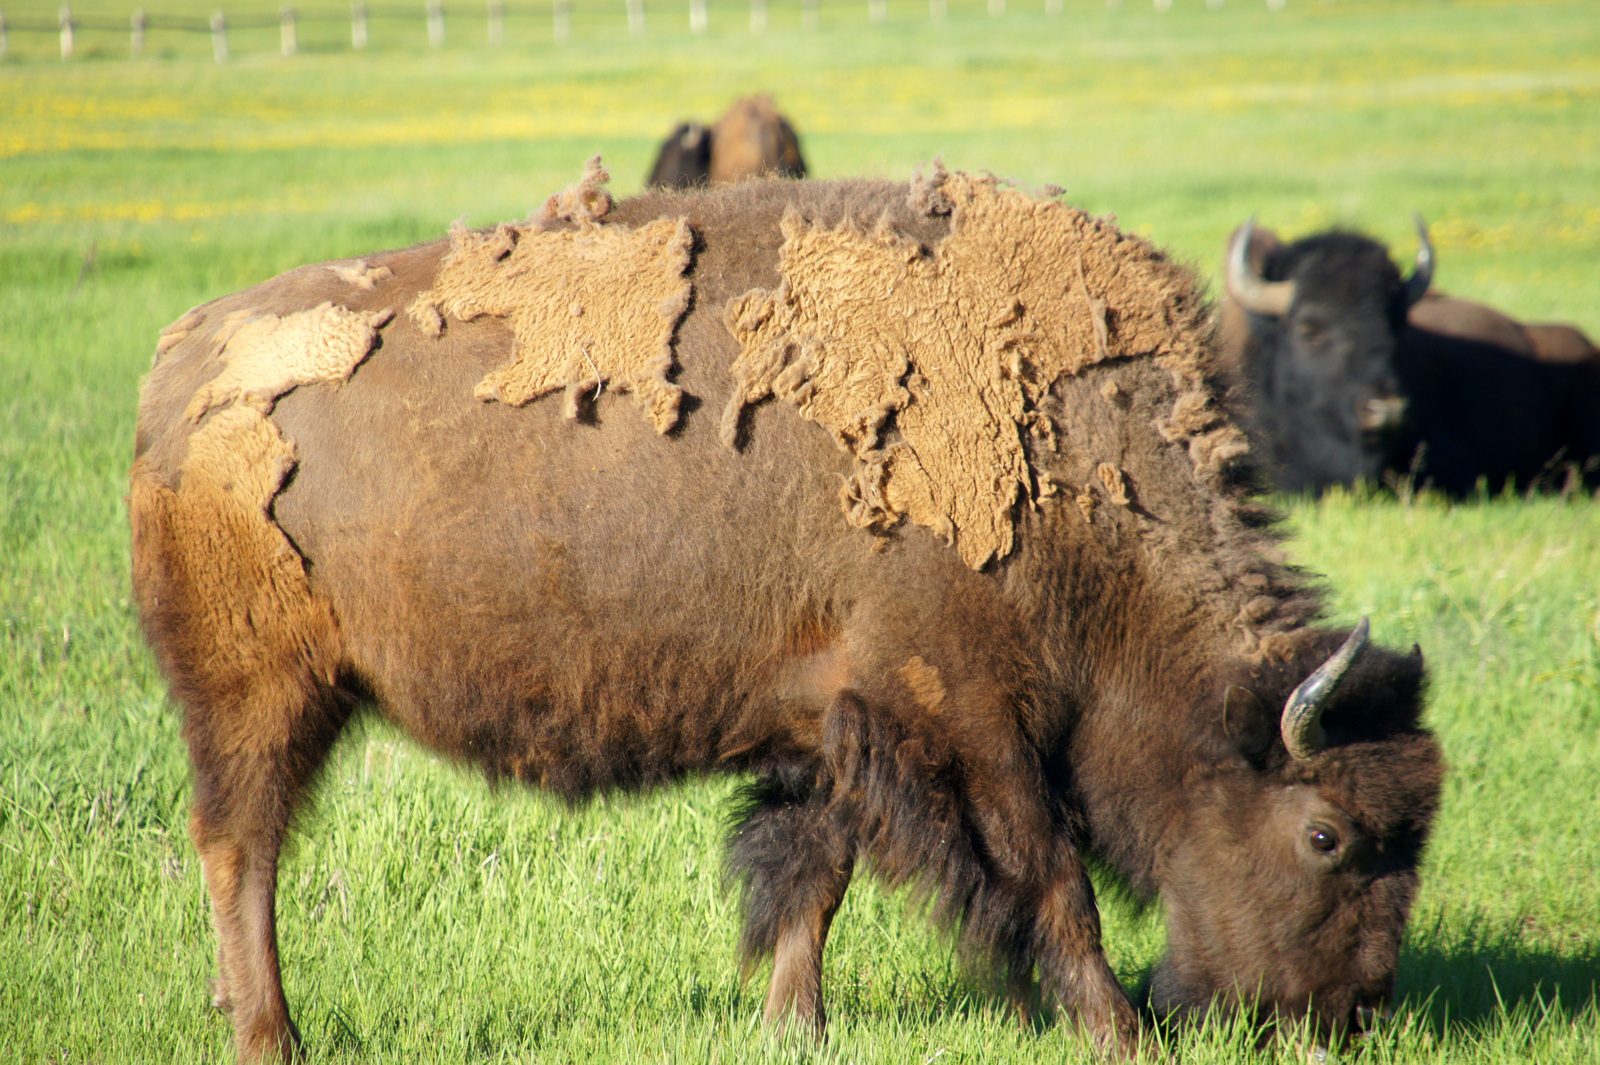 A big ol' bison munching away in the fields.